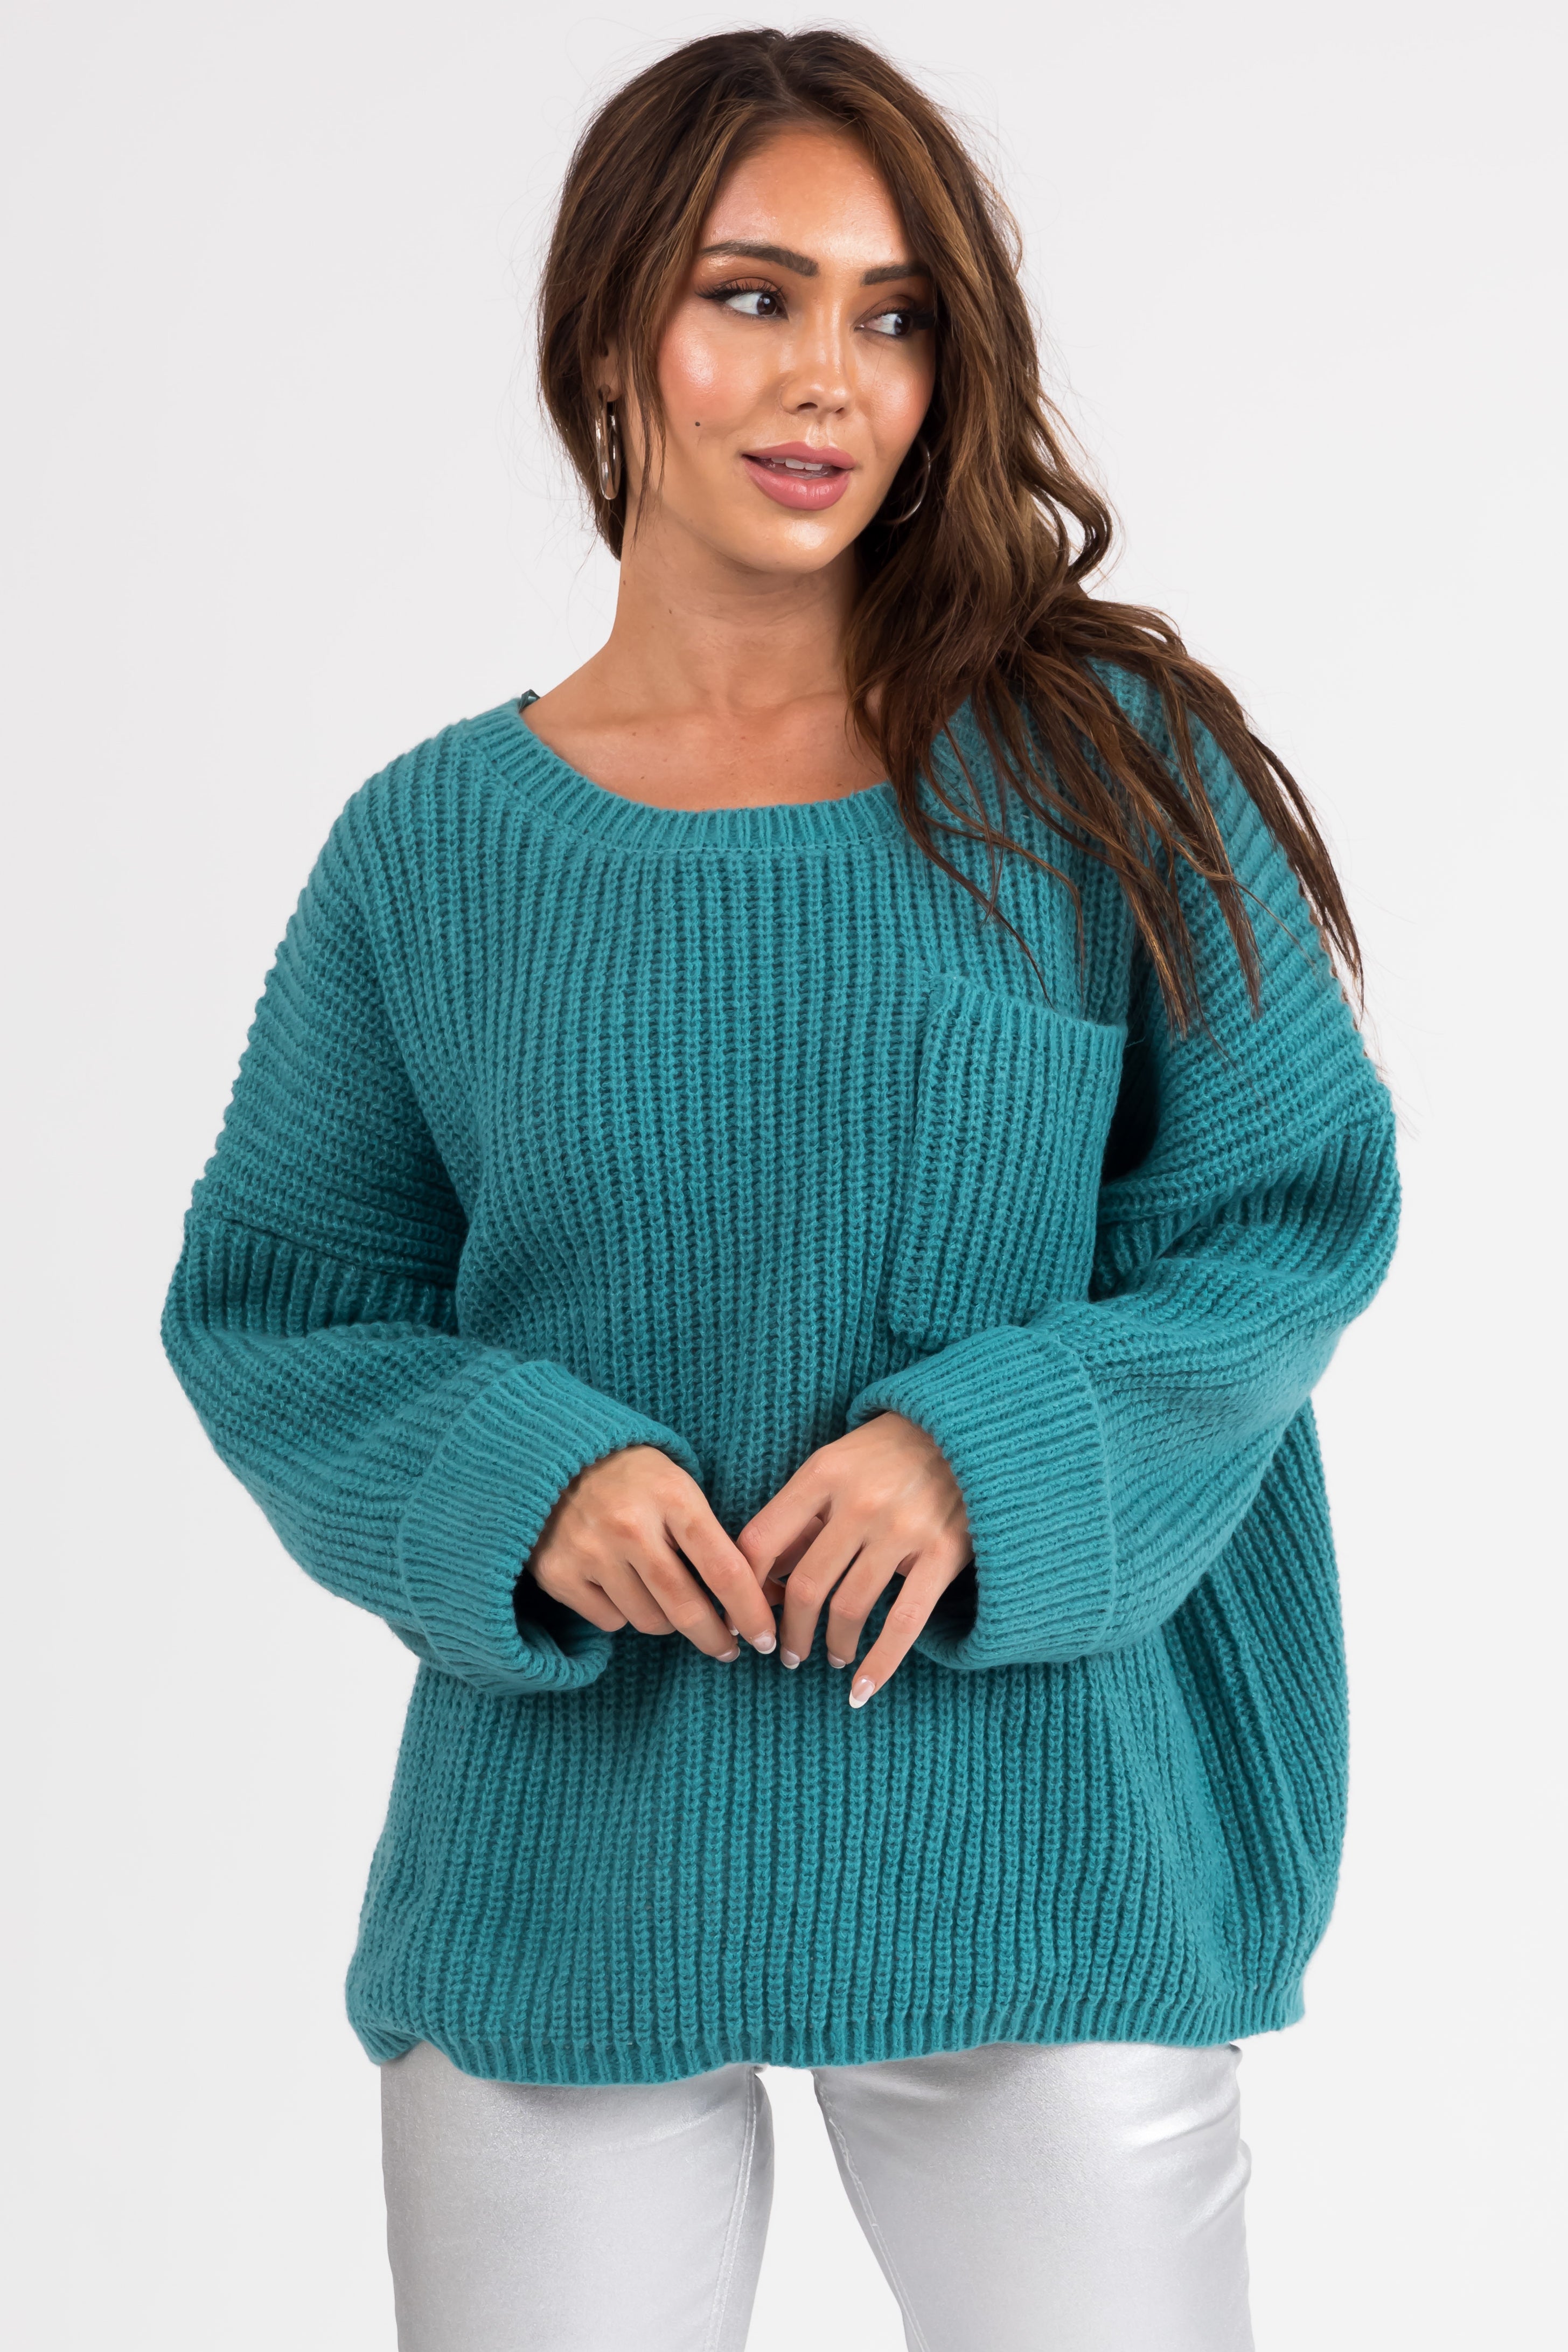 Teal Oversized Chest Pocket Cozy Sweater | Lime Lush